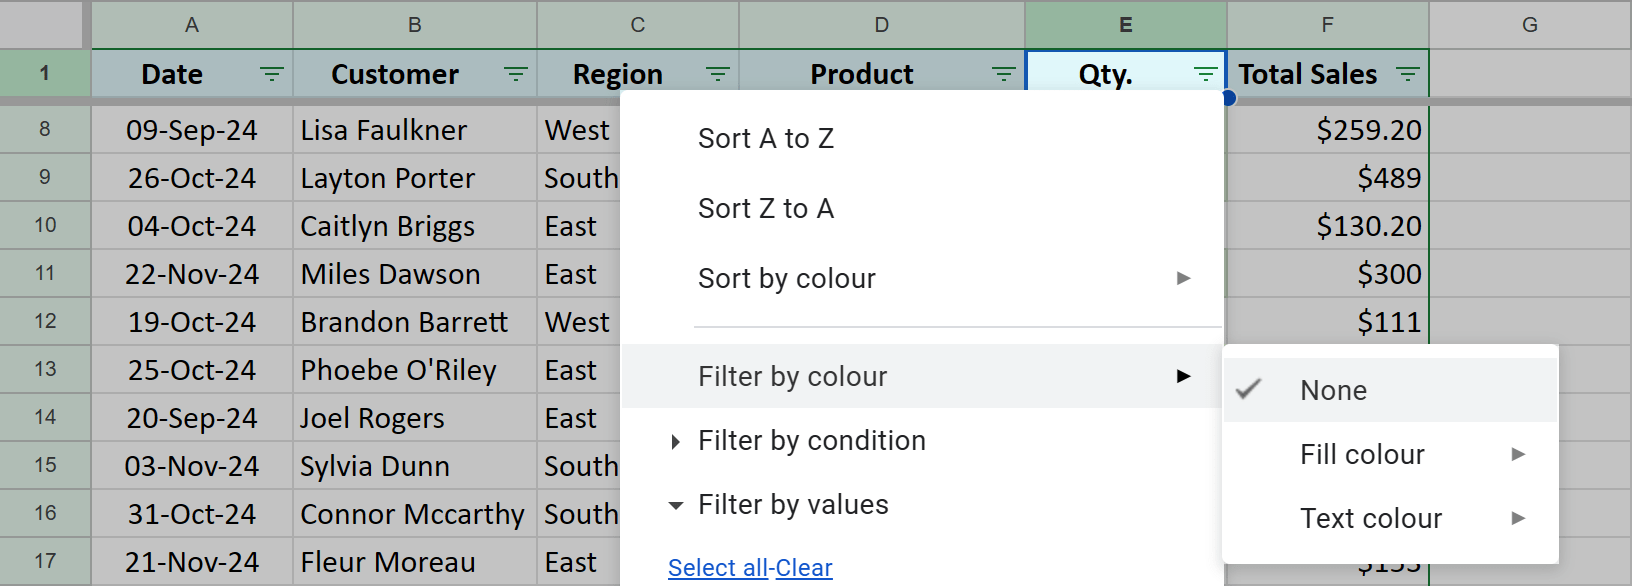 Turn off filtering by color In Google Sheets.